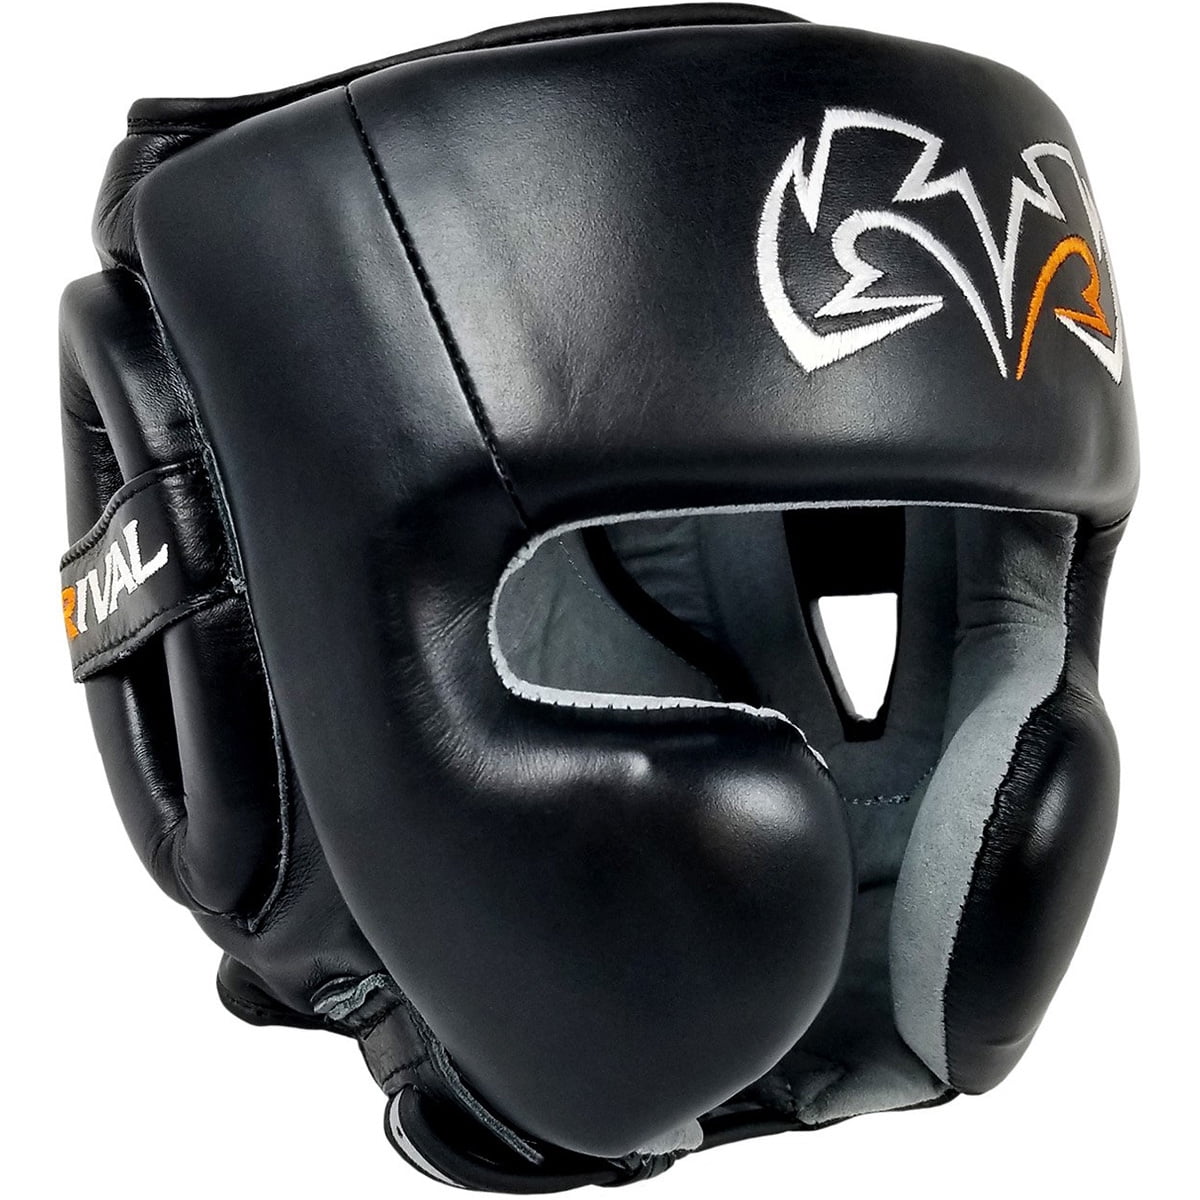 RHG20 Red Training Sparring Rival Boxing Headguard 